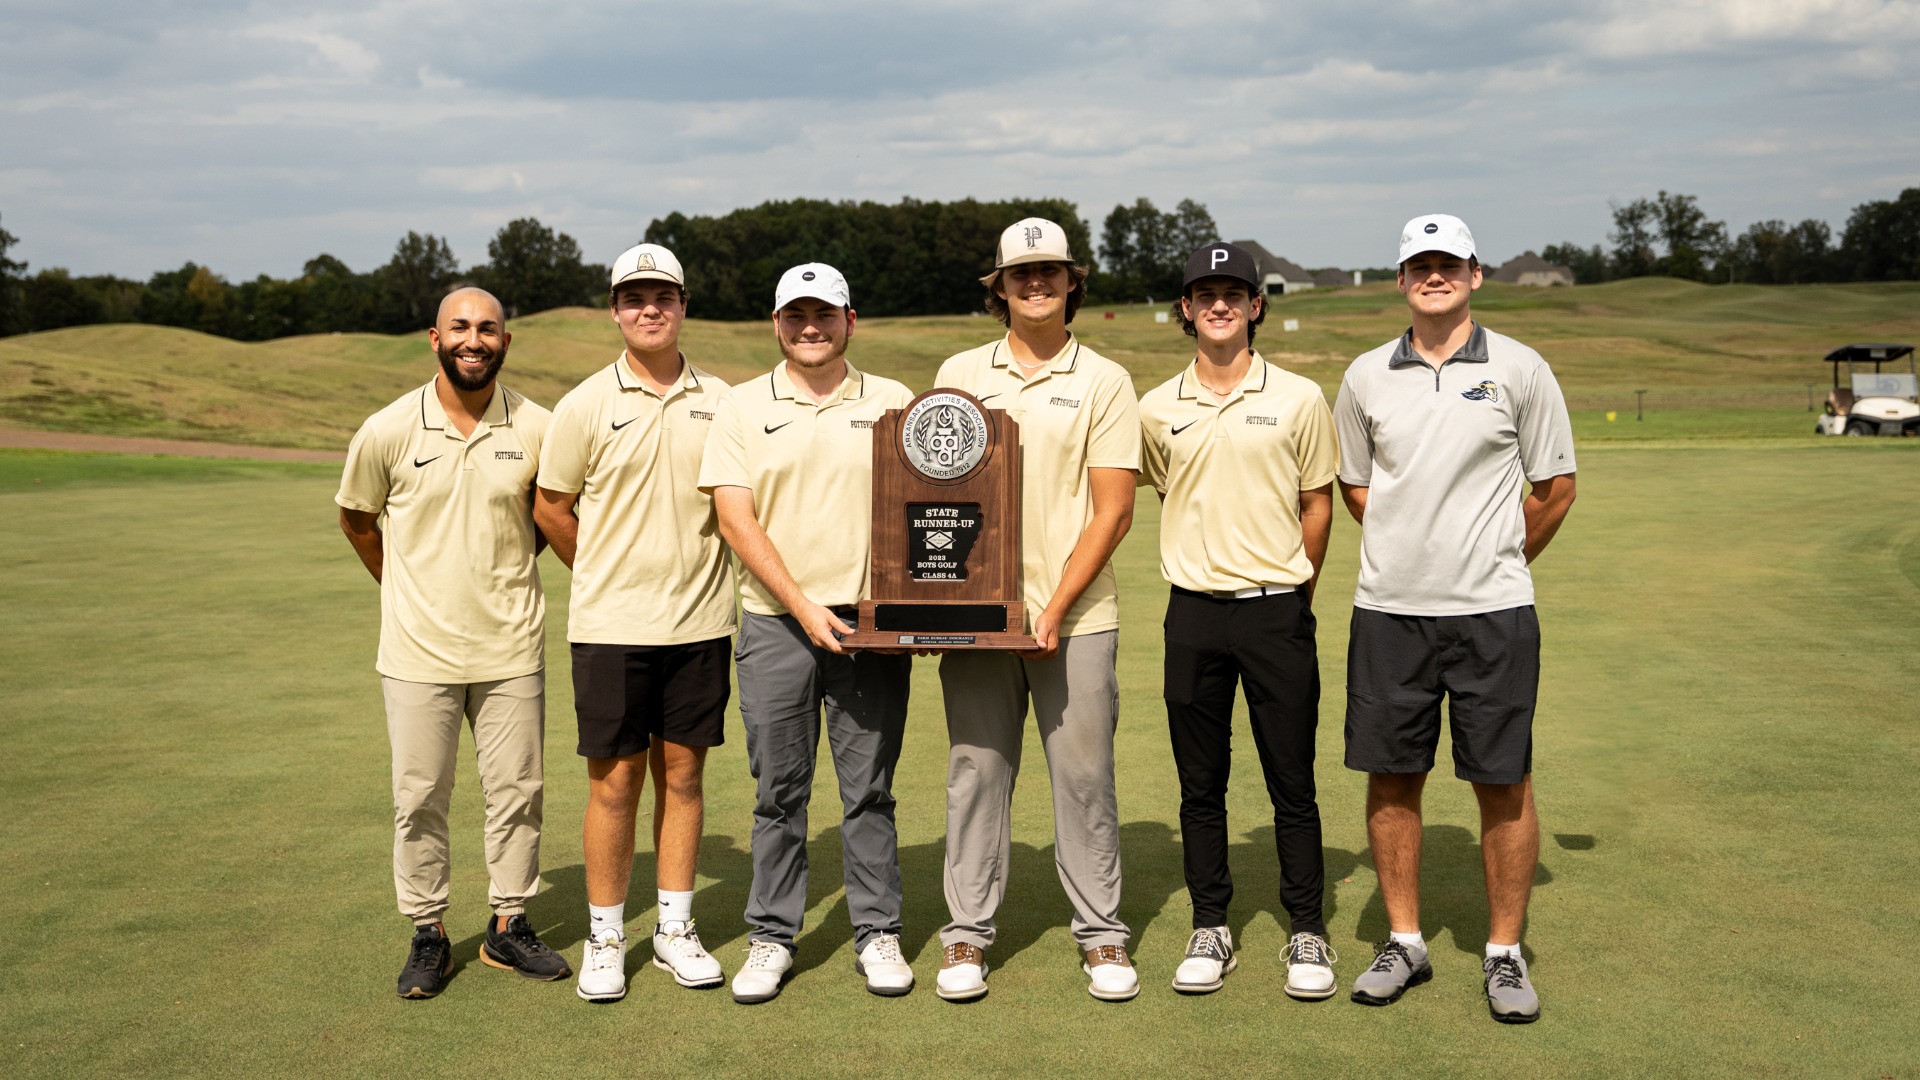 Slide 1 - Congratulations to Jaxson Bowden, Wesley Scroggins, Gabe Mathis and JC Jones for being State Runner Up in Golf